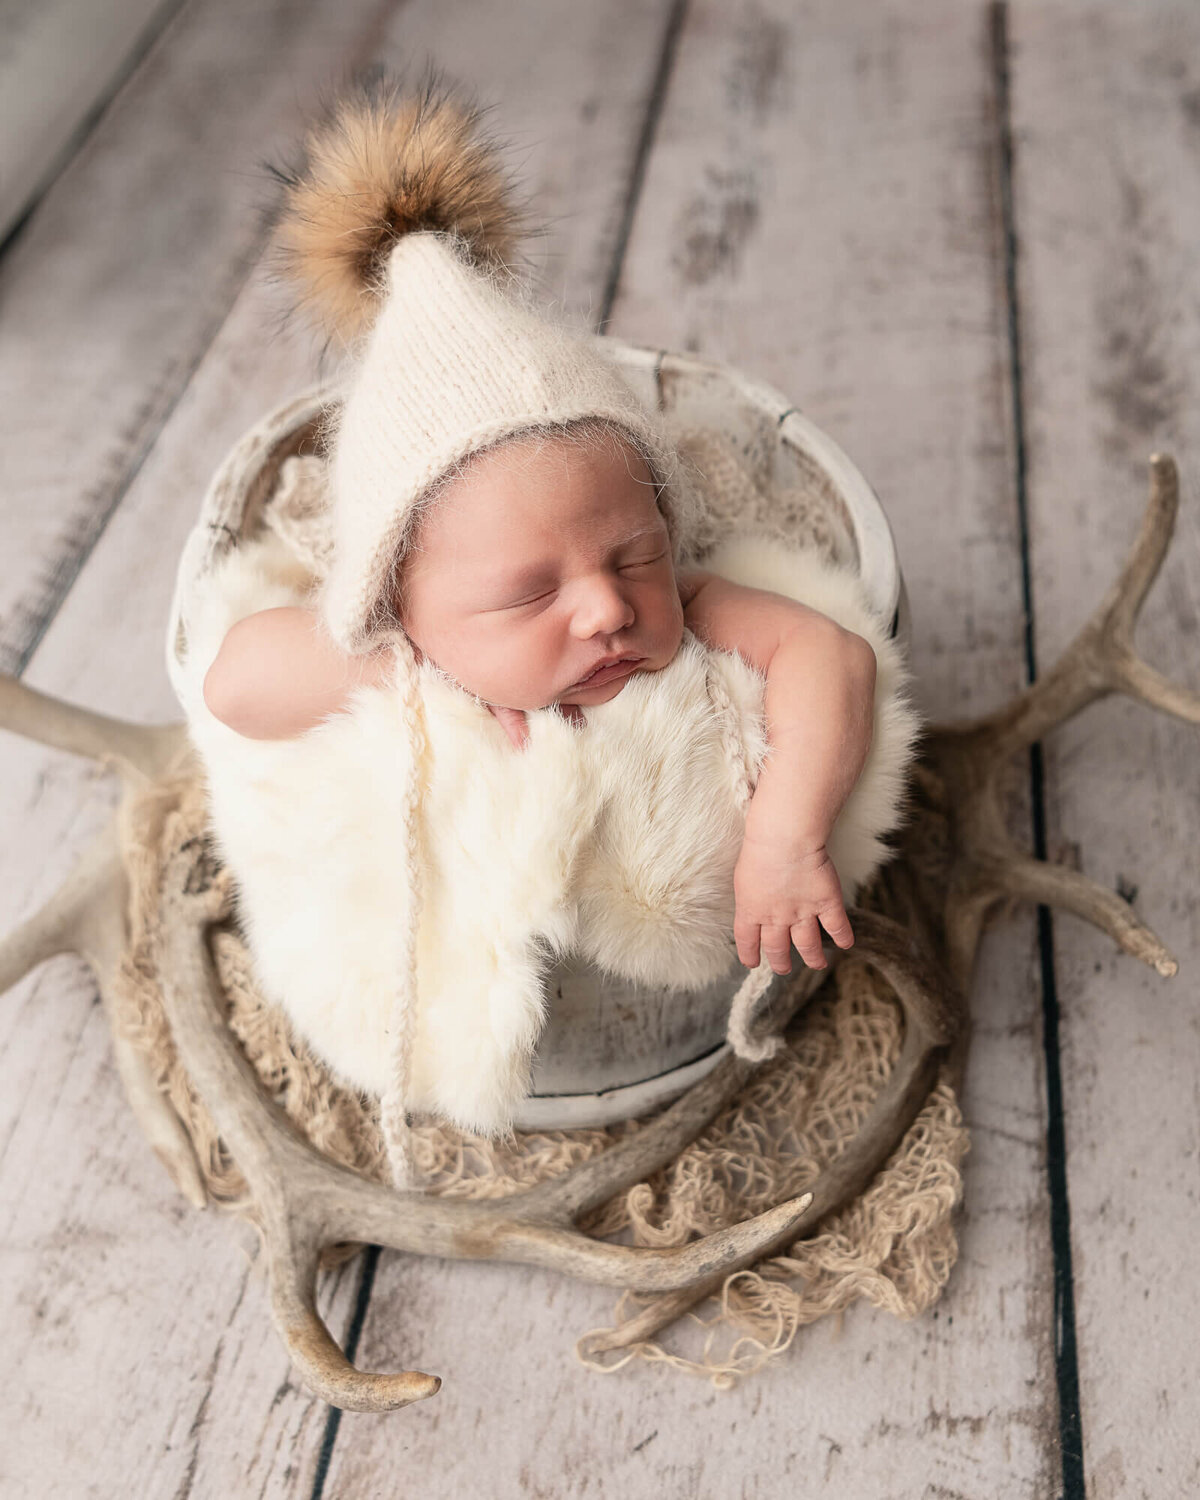 Baby in bucket with Antlers